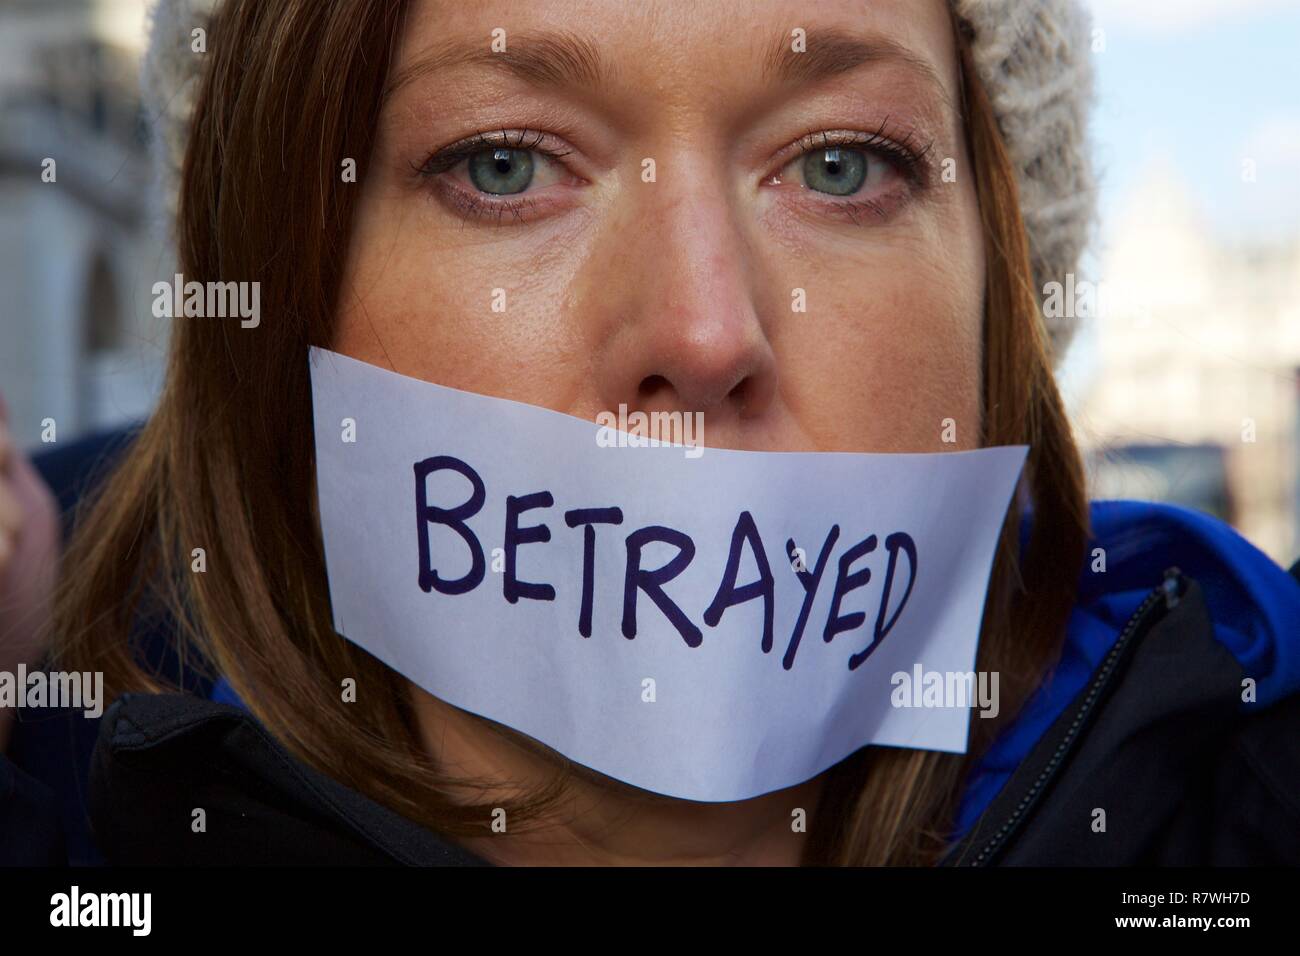 London, UK. Tuesday 11 December 2018 - pro & anti Brexit demonstrators gather to voice their views, after Teressa May delays parliamentary vote on the 'Deal'. A young women walks muted with tape on her lips bearing the word 'Betrayed.' Parliament Buildings in London - UK Credit: Iwala/Alamy Live News Stock Photo